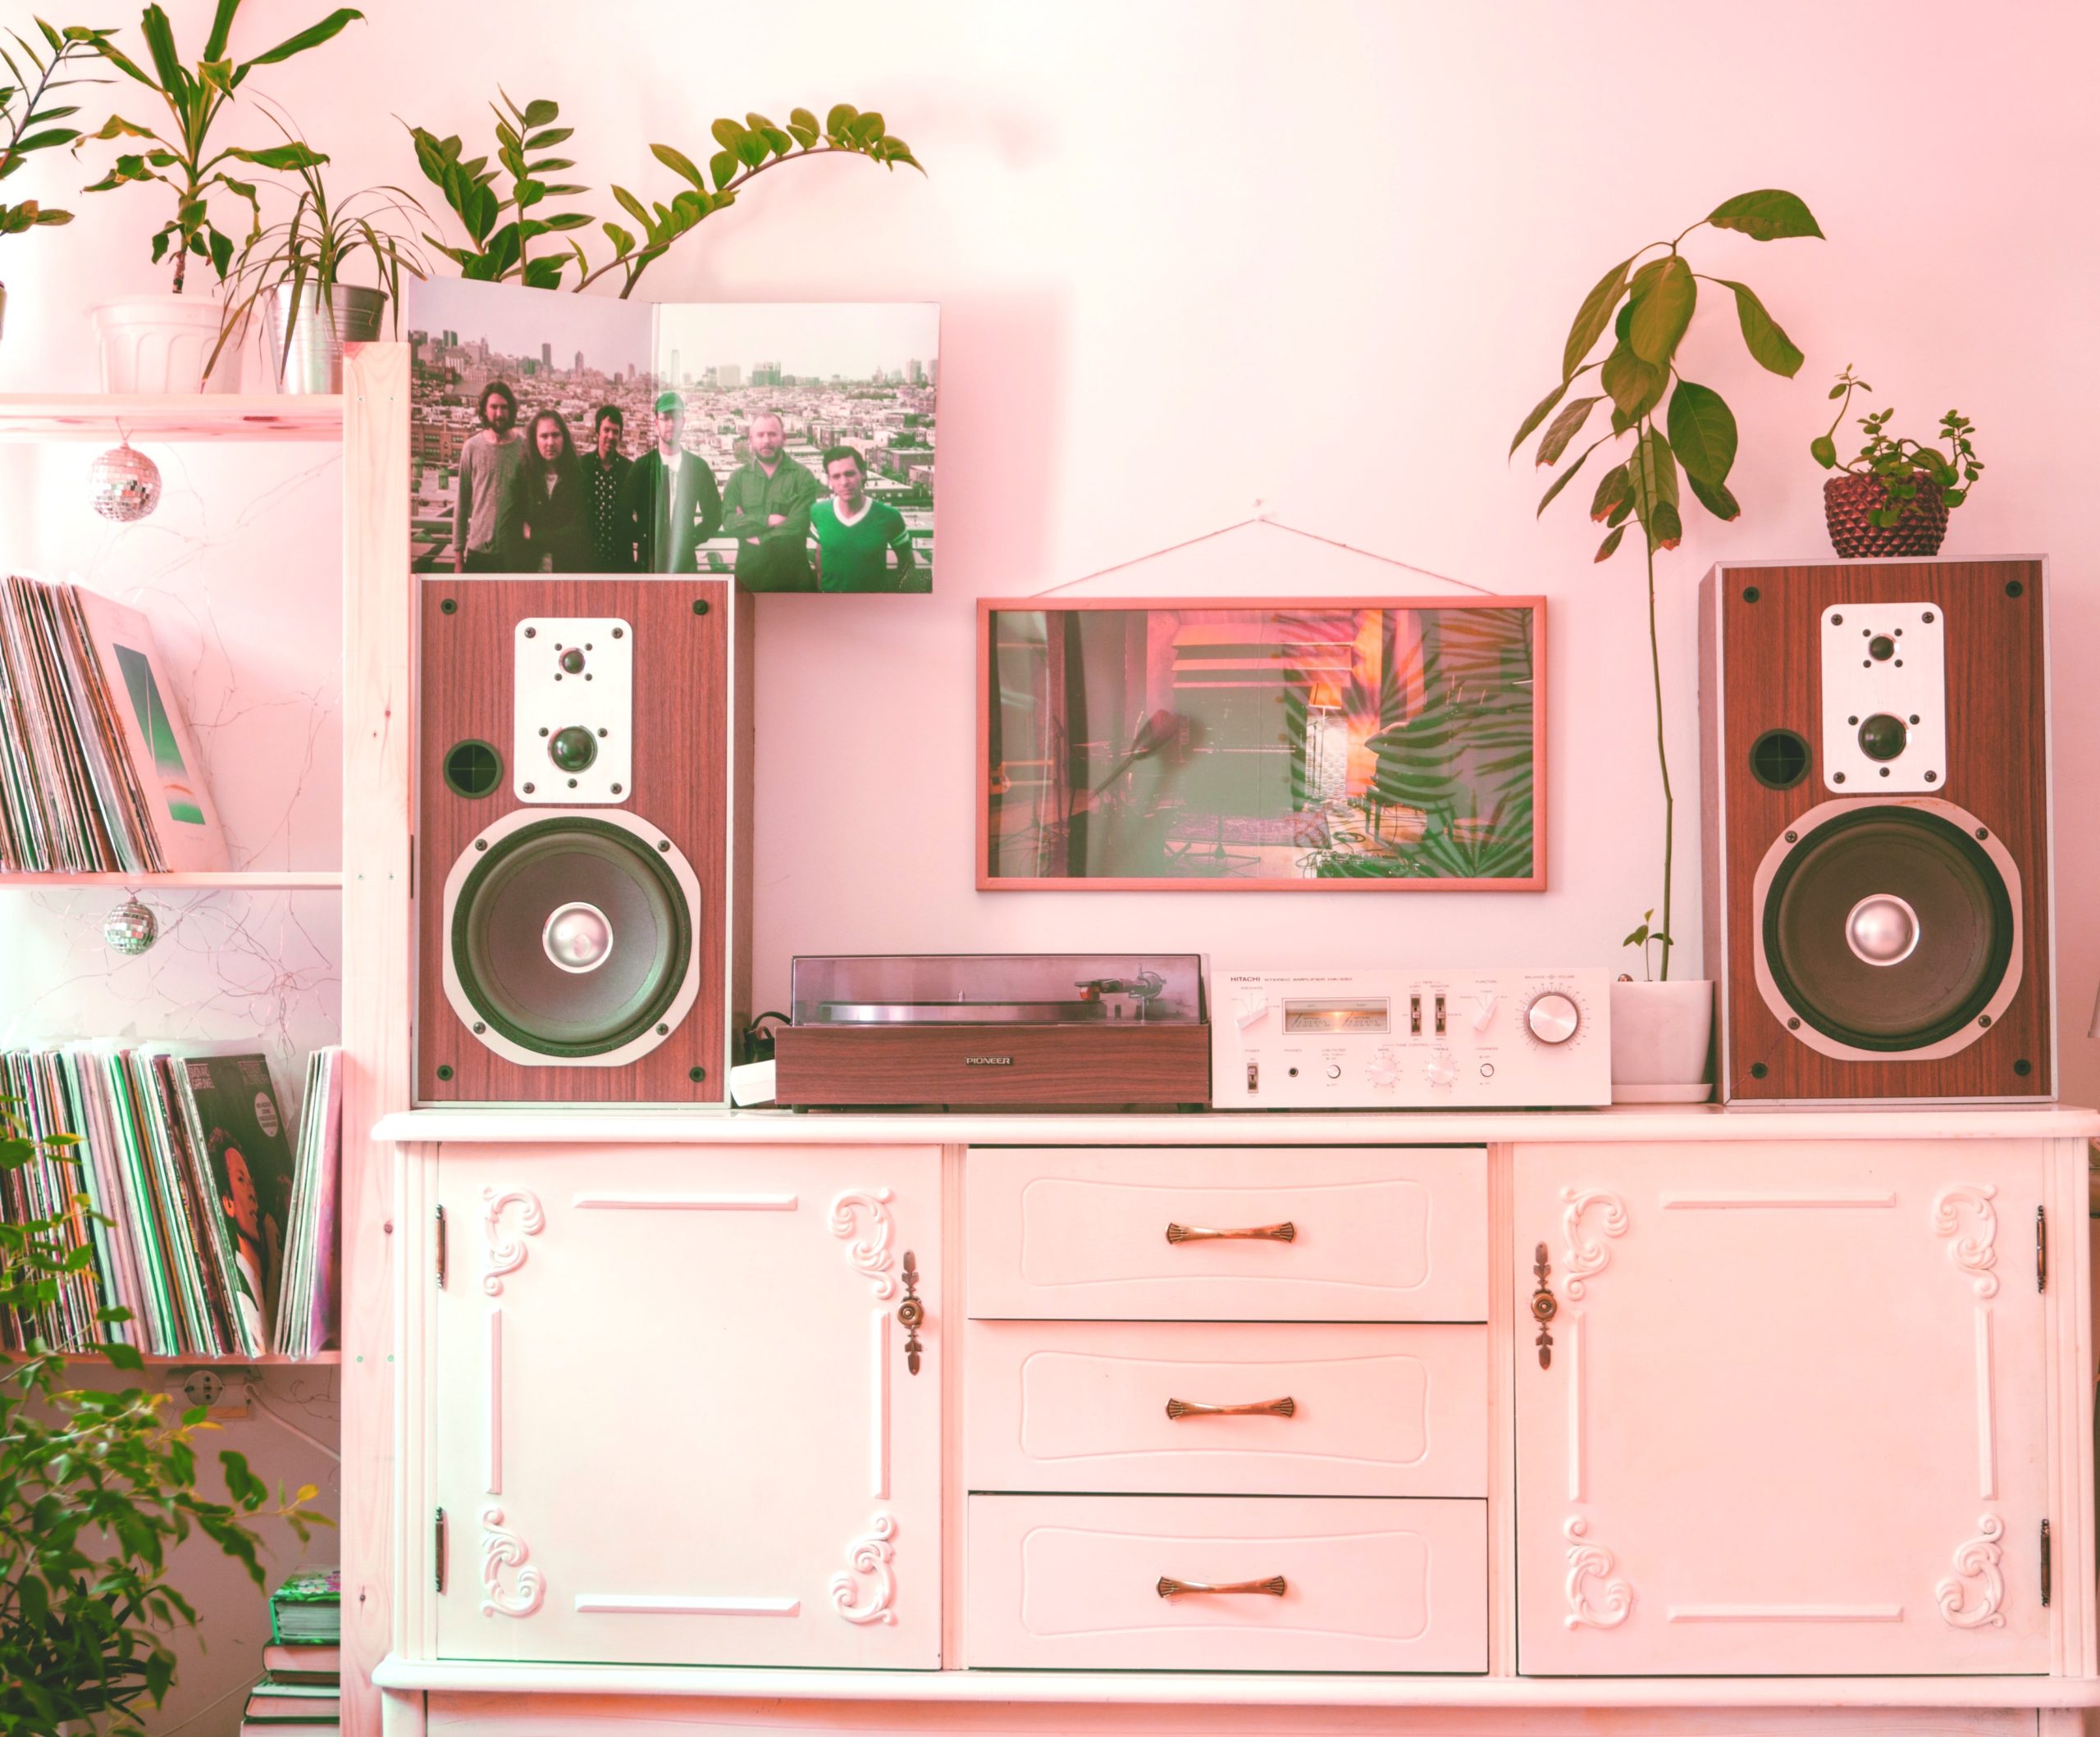 <img src="house.jpg" alt="instagrammable house with stereos"/> 